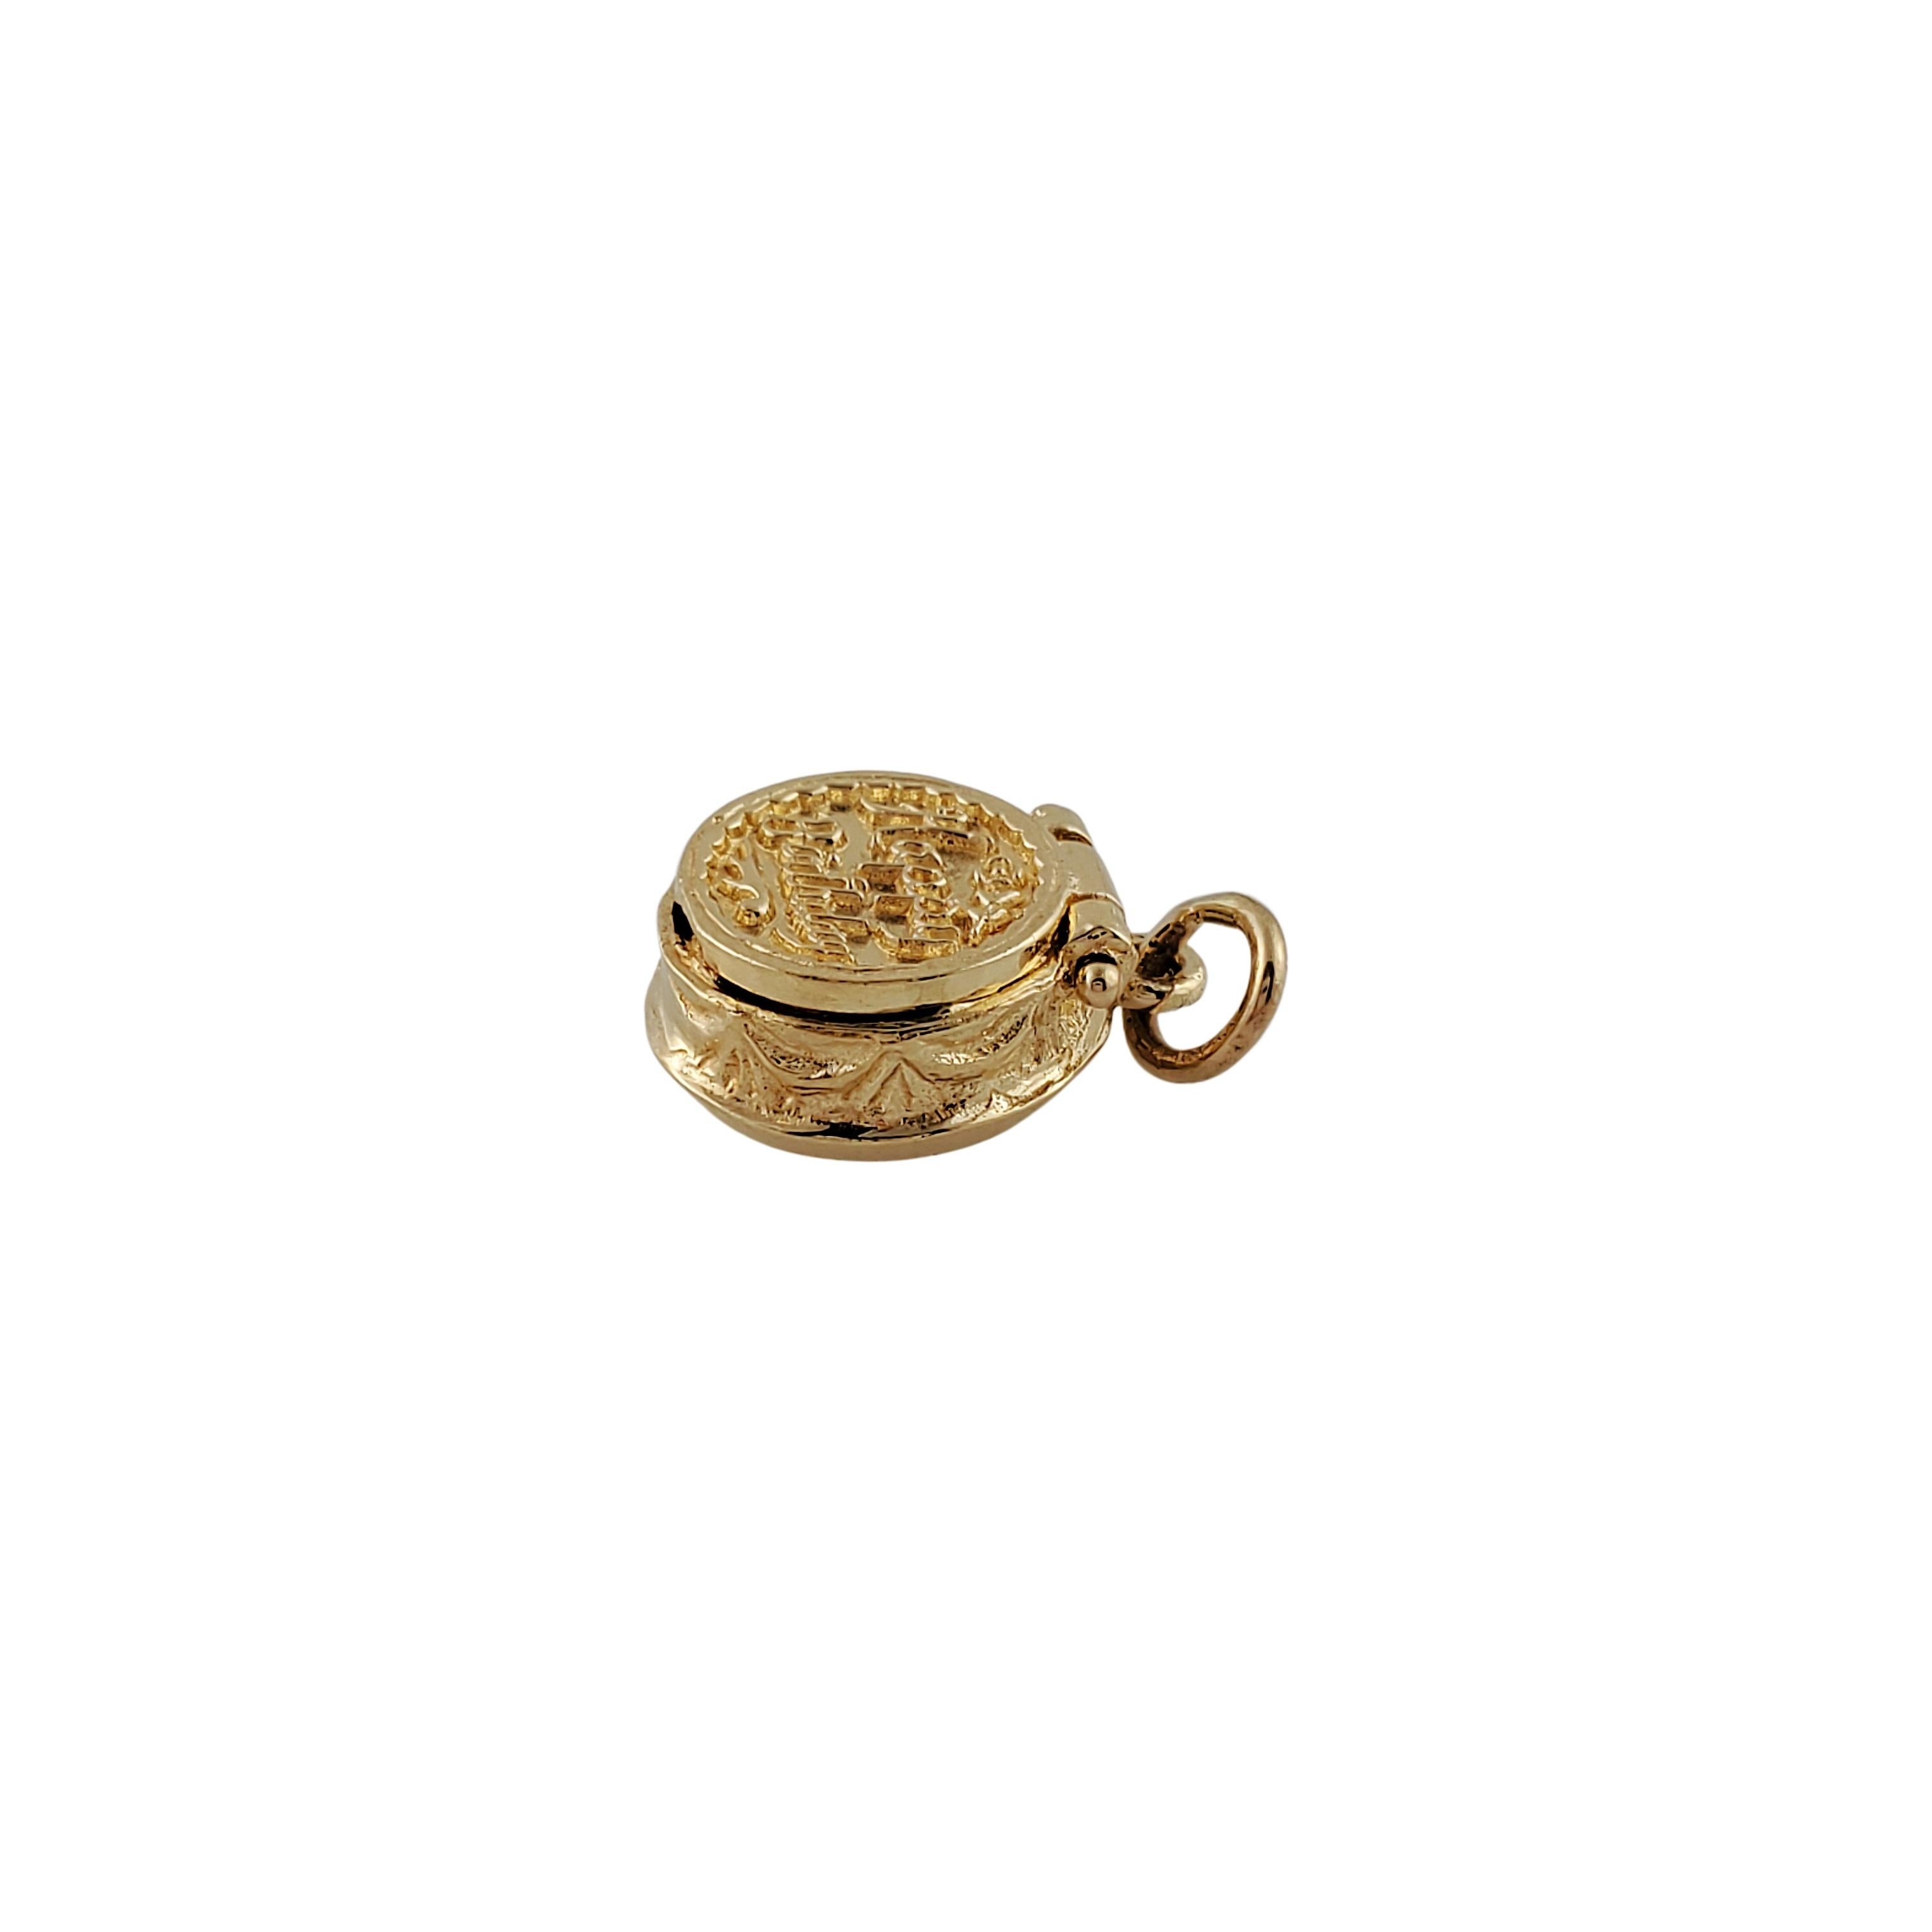 Vintage 14K Yellow Gold Happy Birthday Charm

Beautiful birthday charm detailed in yellow gold.

Size: 14.22mm X 11.10mm

Weight: 3.6 gr / 2.3 dwt

Hallmark: RQC 14K

Very good condition, professionally polished.

Will come packaged in a gift box